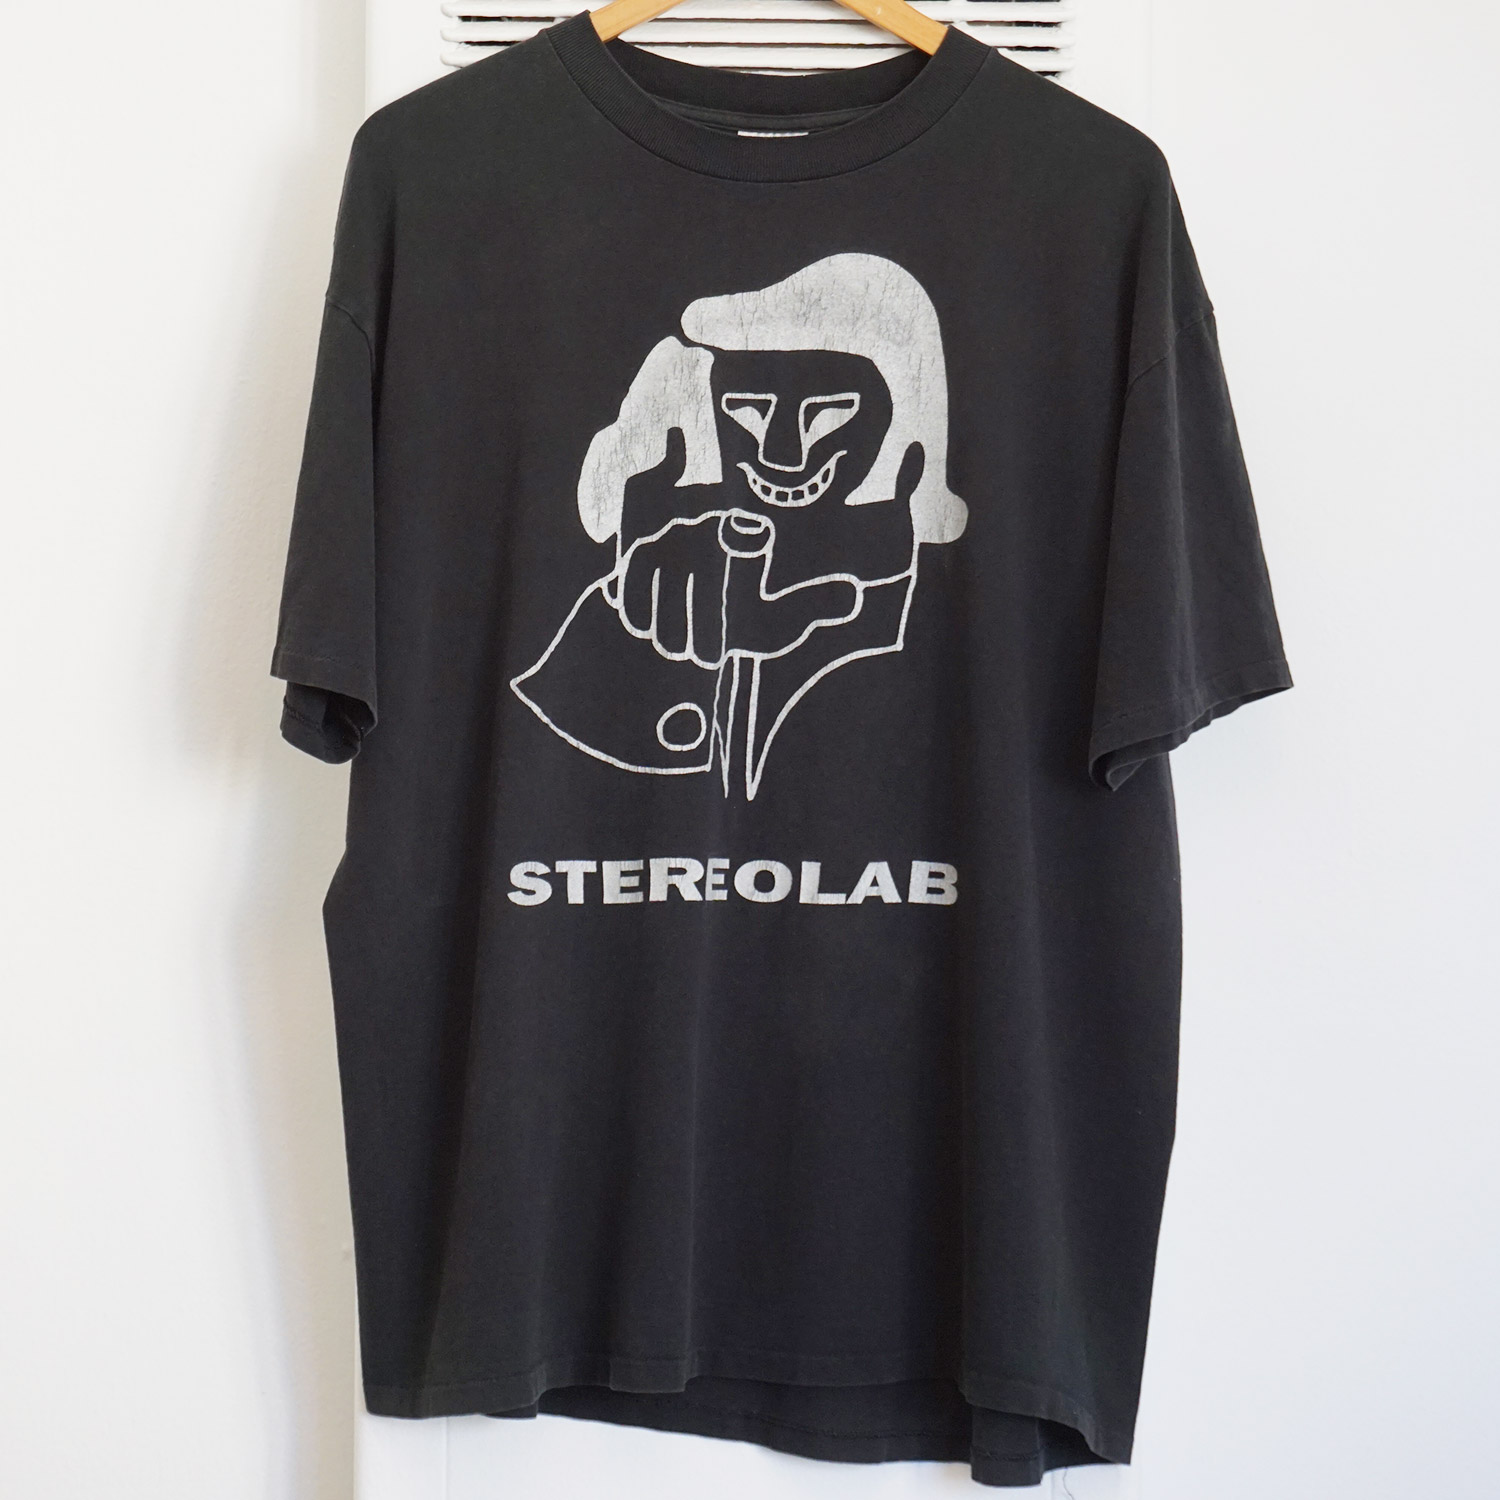 Vintage Stereolab T-shirt, Front